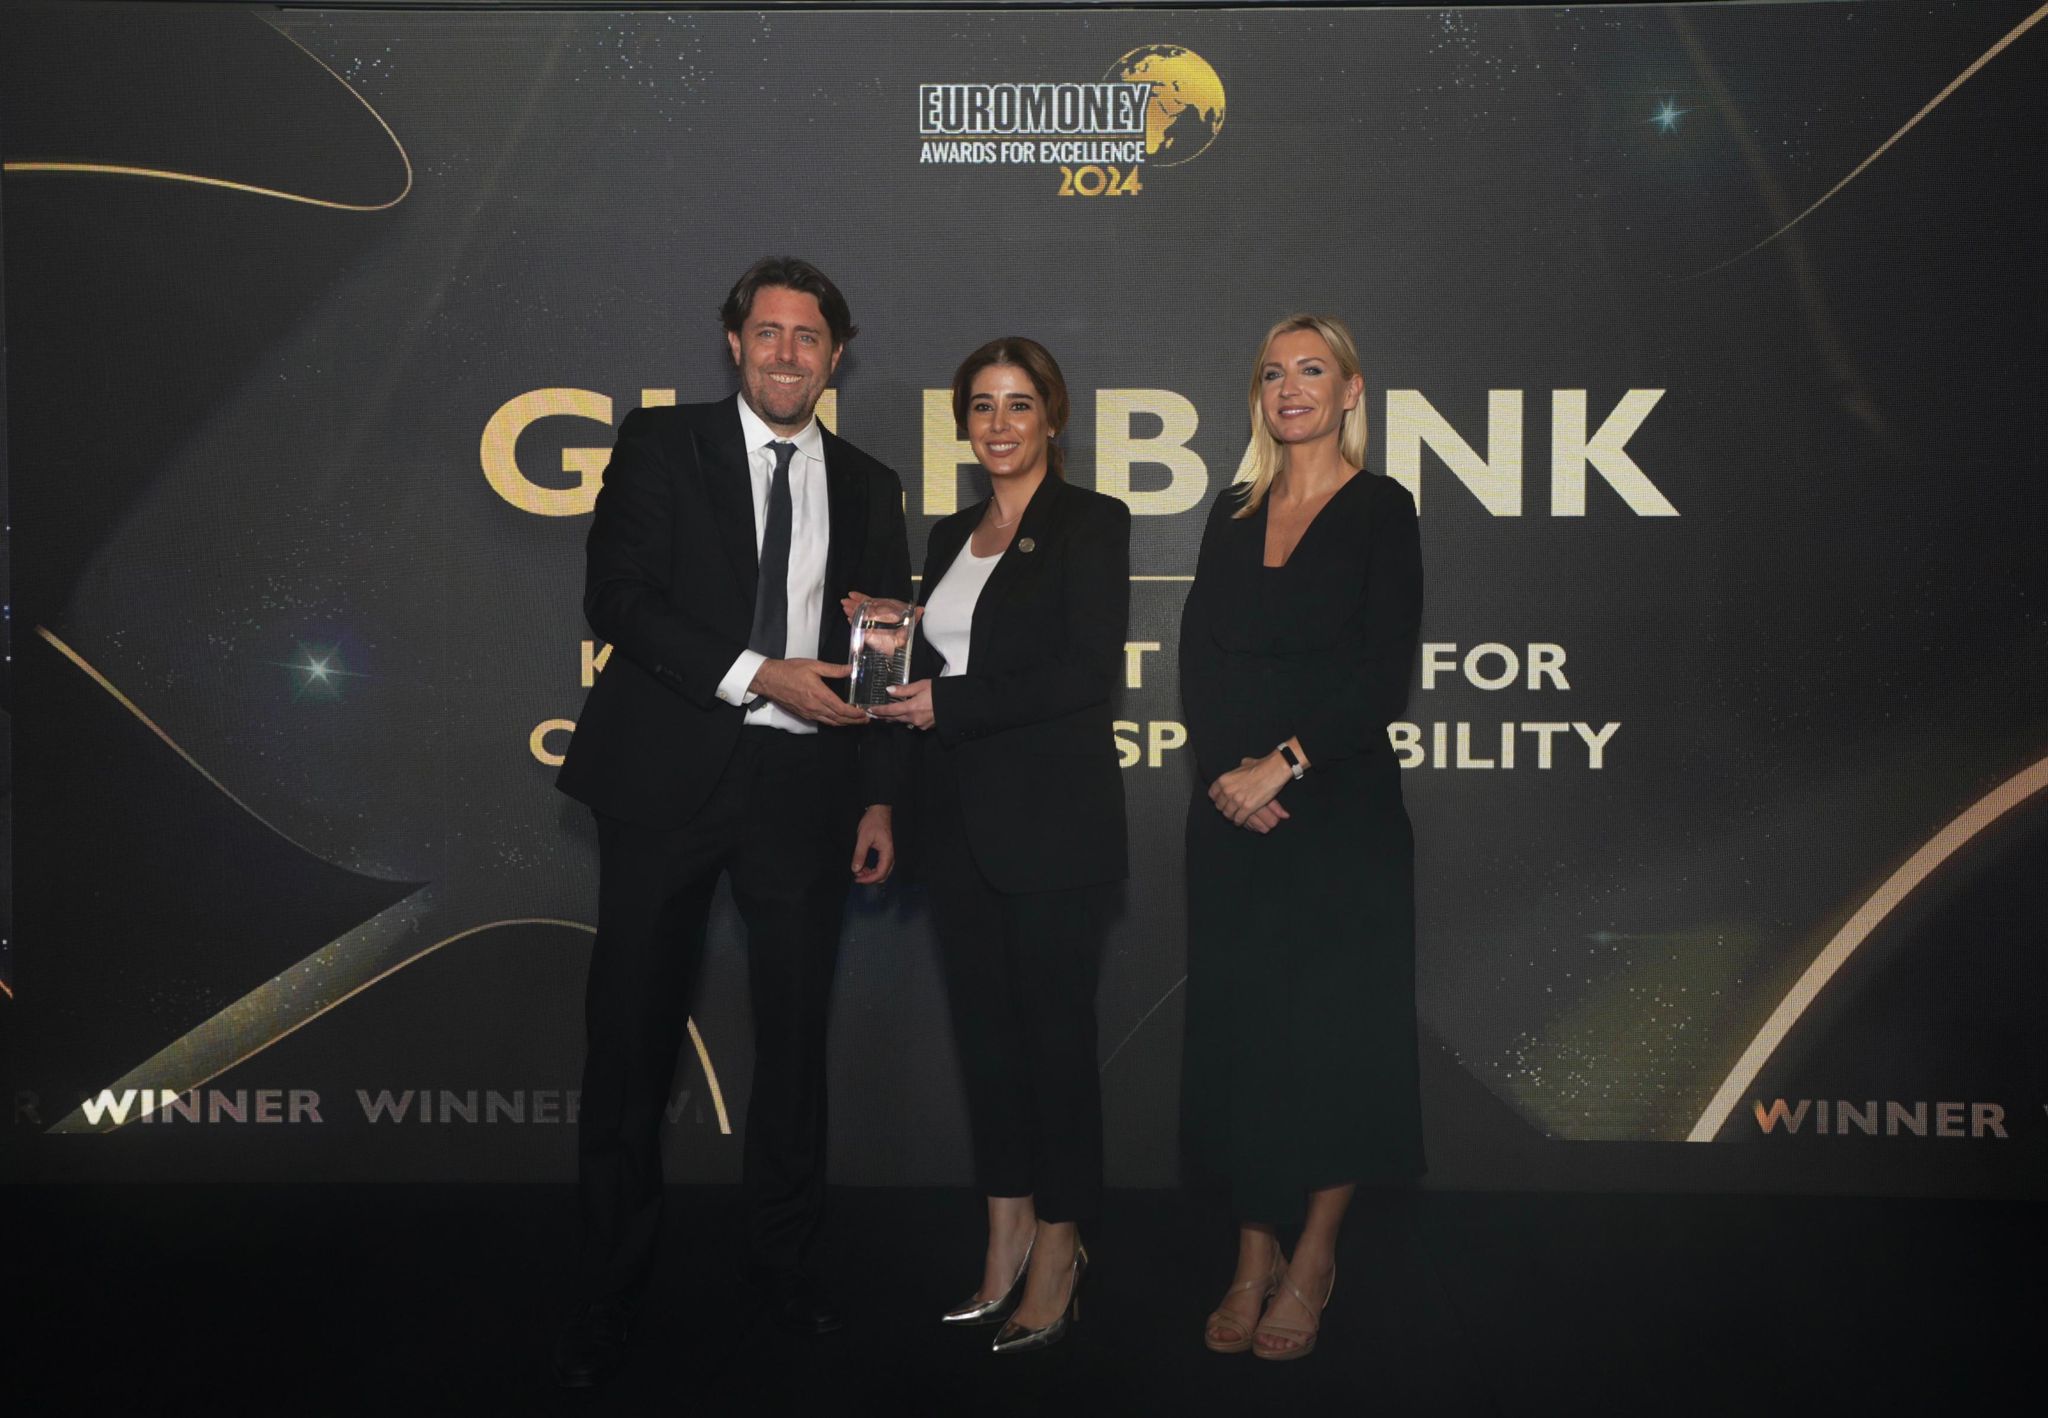 Gulf Bank Earns Euromoney Recognition for Social Responsibility and Community  Engagement – ARAB TIMES – KUWAIT NEWS